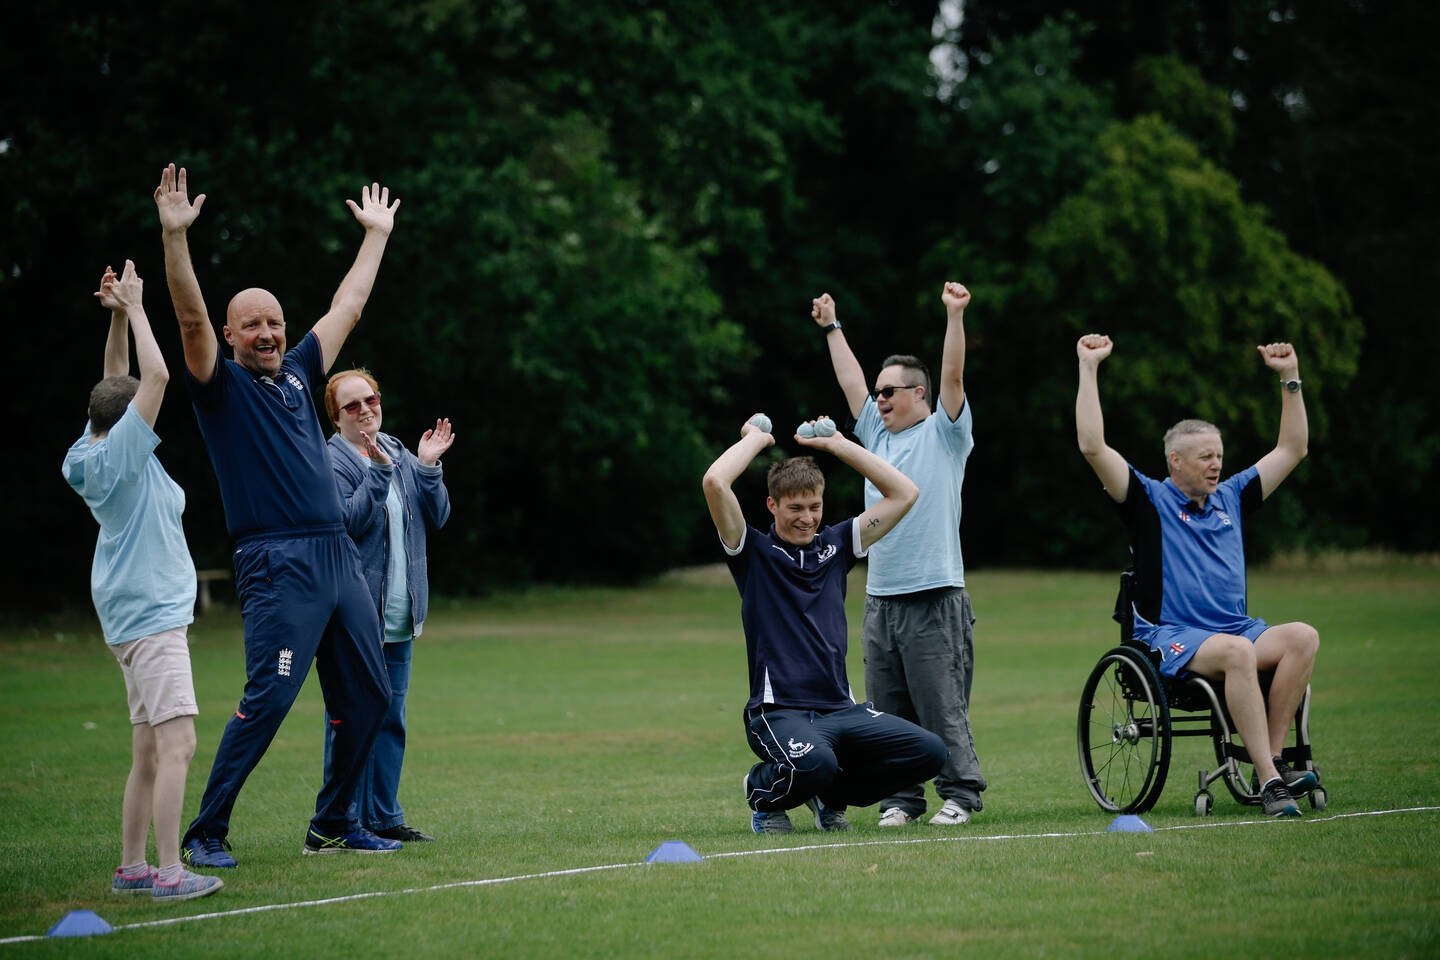 Group of disabled people having fun playing cricket based games and skills 